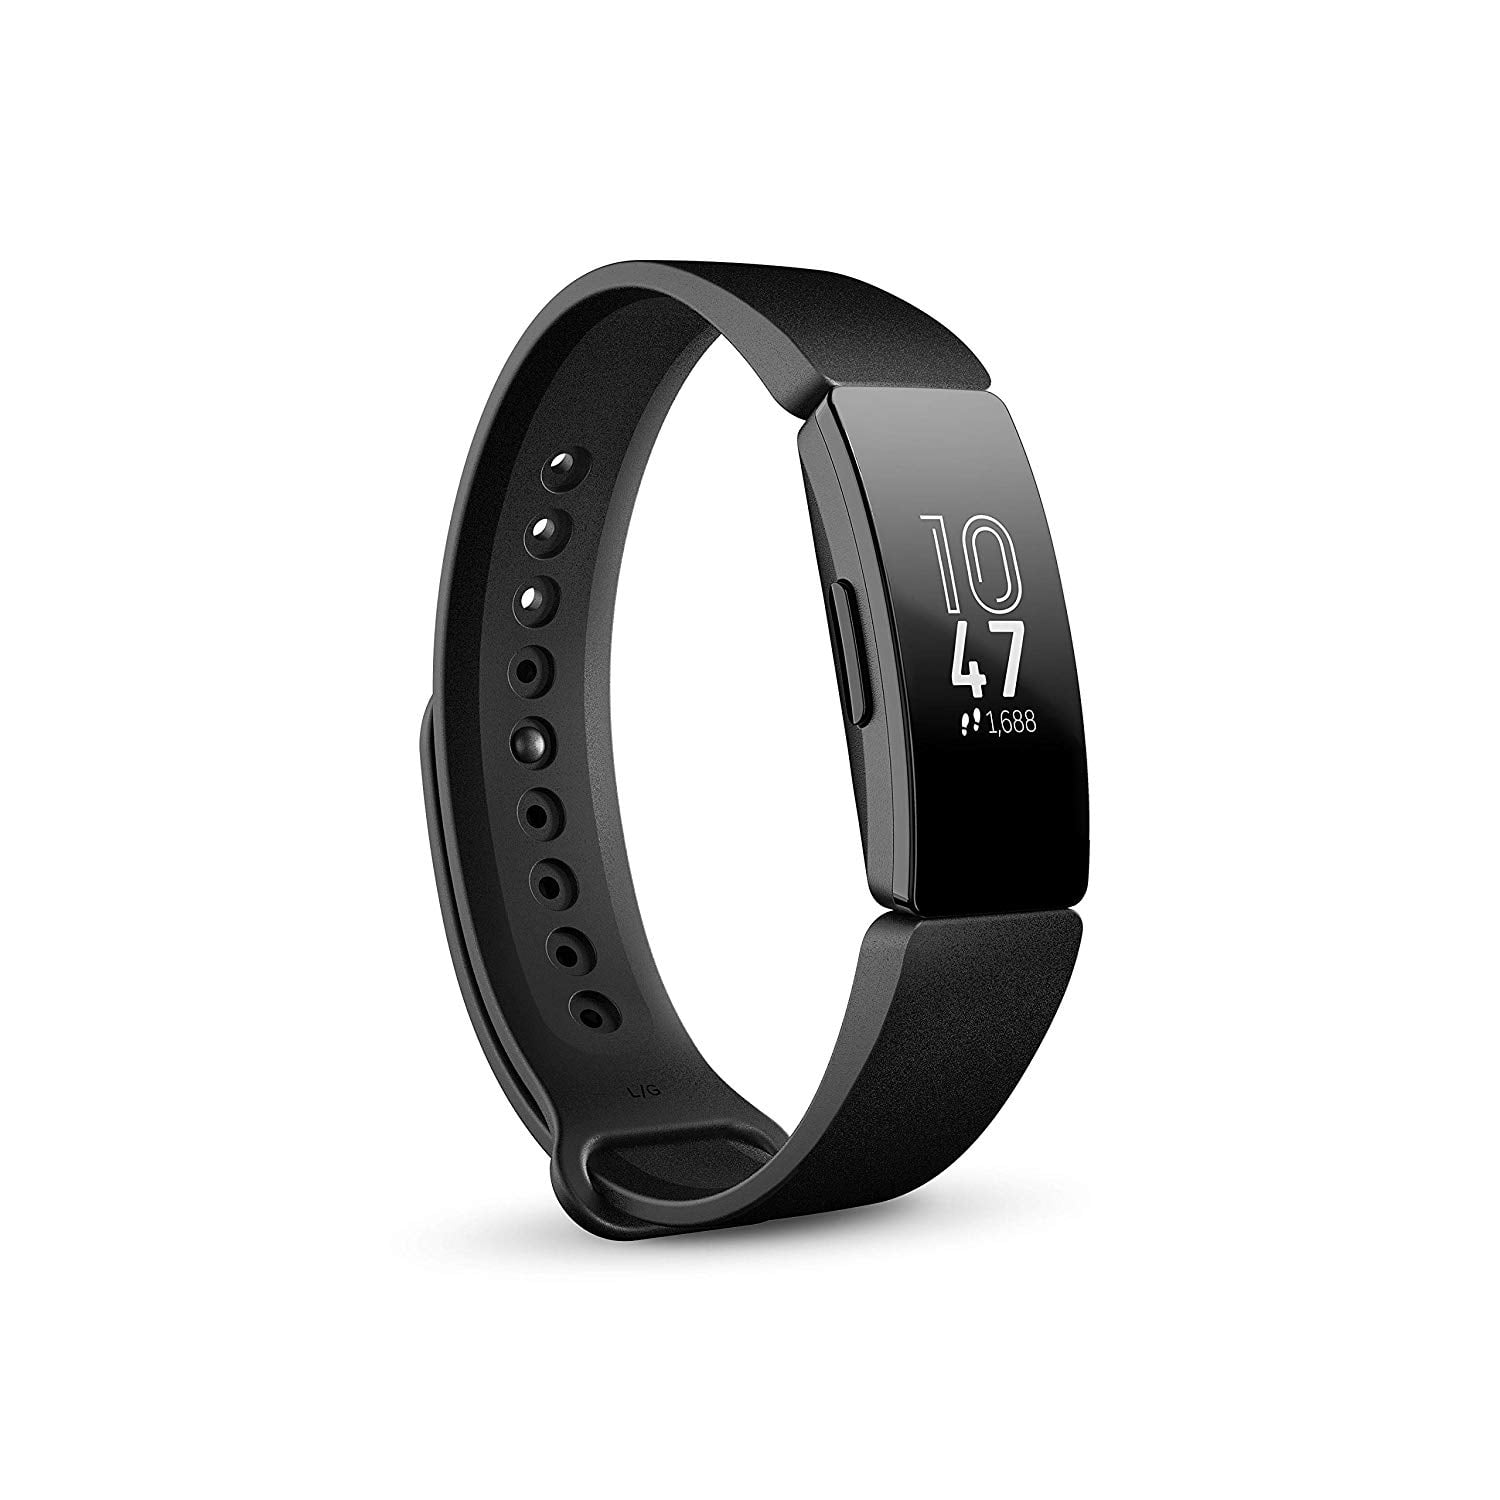 Includes Small and Large Wristbands Black Fitbit Inspire Fitness Tracker 